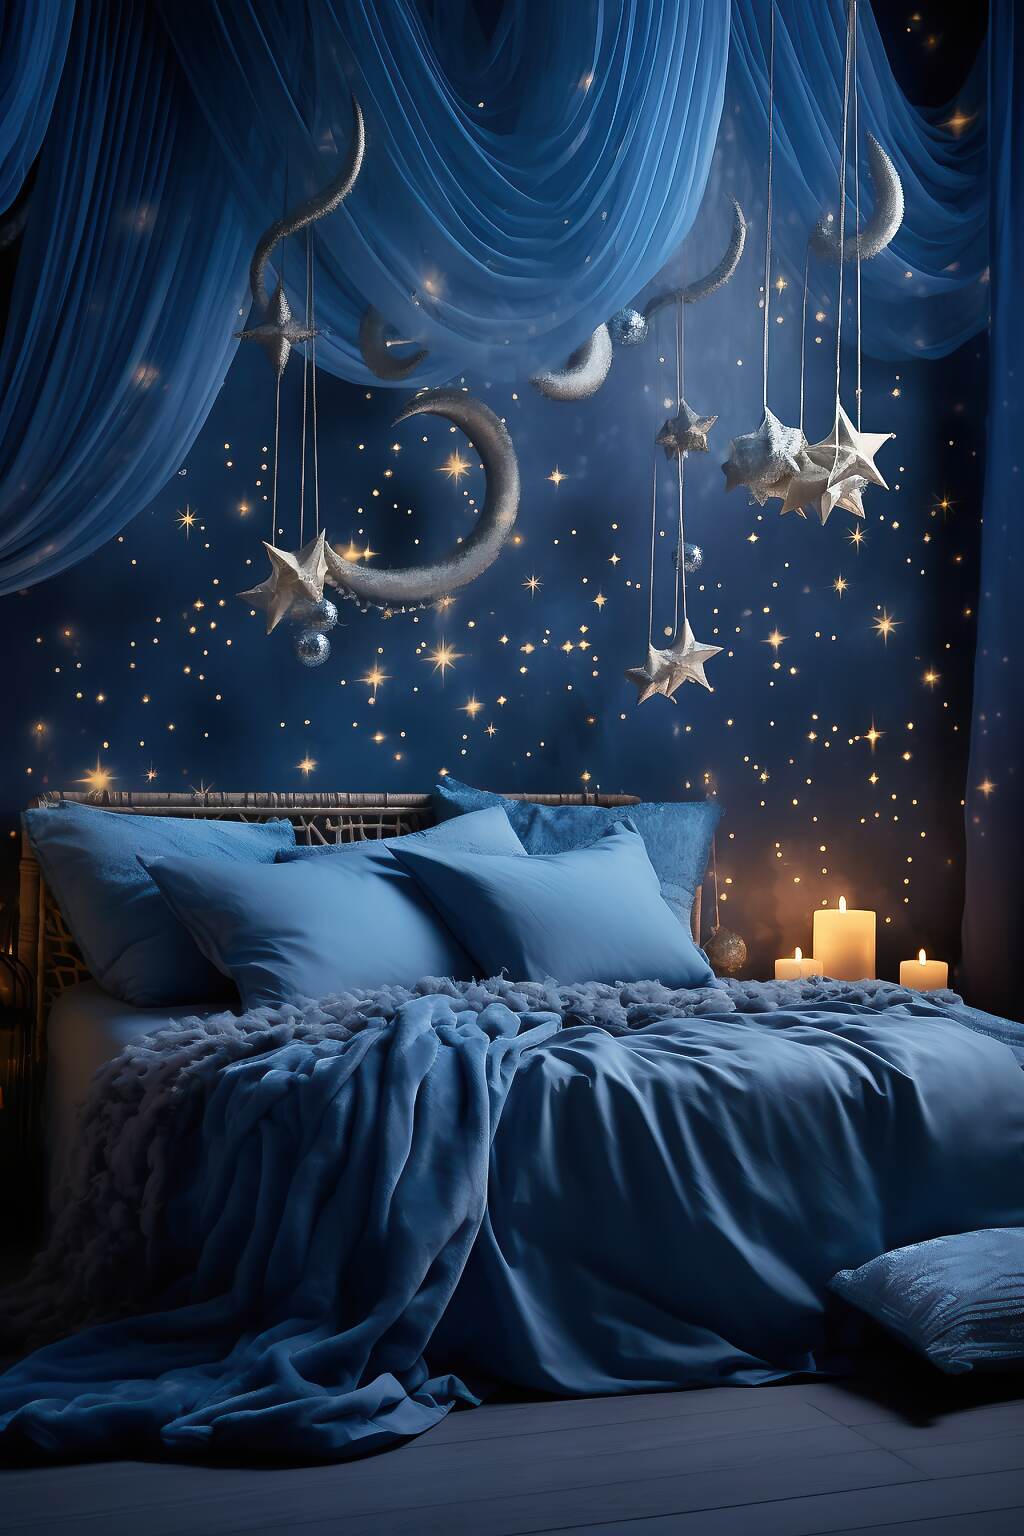 Medium-Sized Dark Boho Bedroom With A Blue &Amp; White Color Scheme, Featuring Cloud Motif, Hanging Stars, And Skyline Art, Creating A Dreamy And Airy Atmosphere.